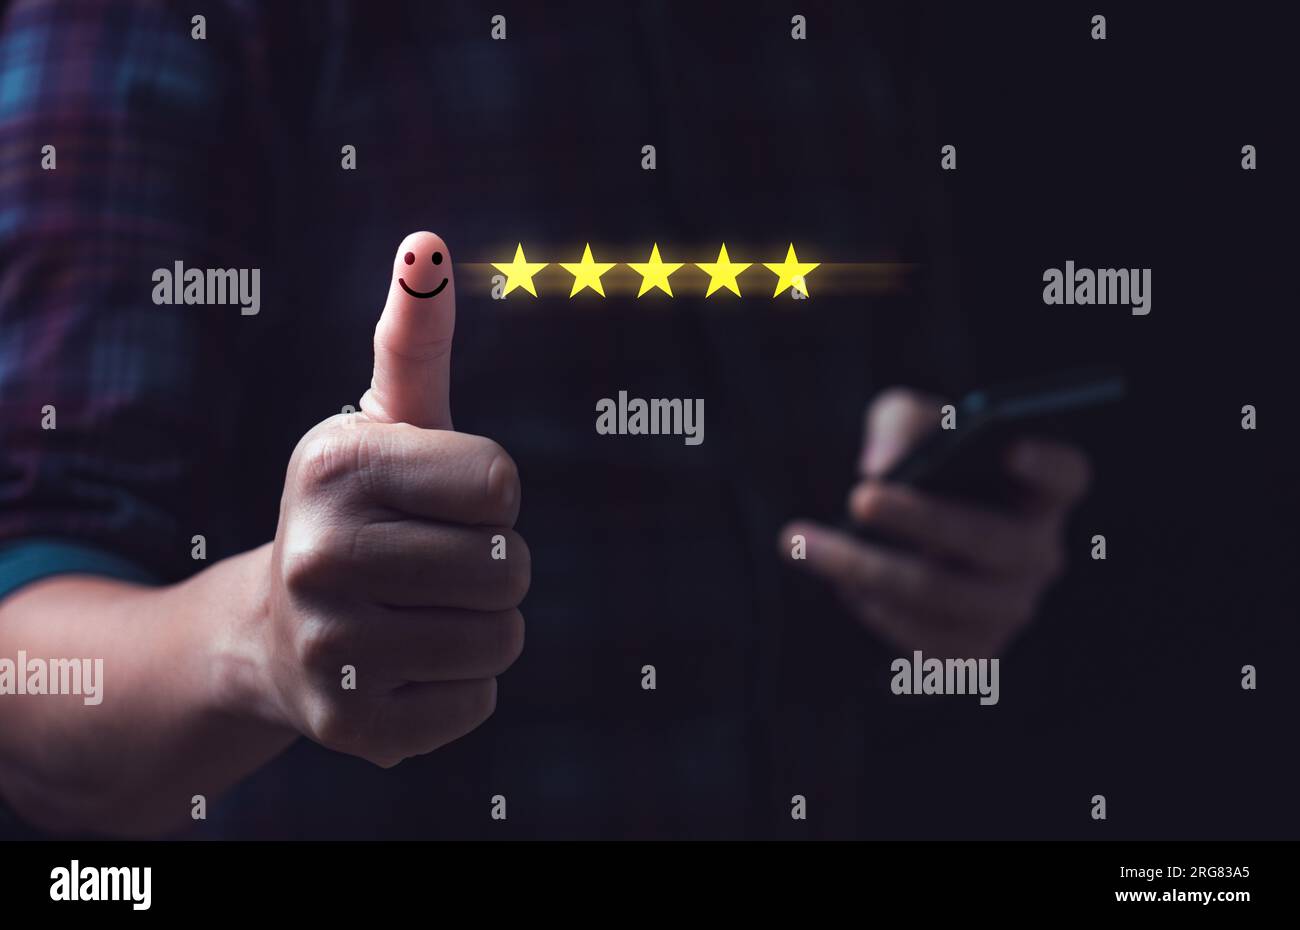 Customer satisfaction concept. Hand with thumb up Positive emotion smiley face icon and five star with copy space. 5 star satisfaction, Excellent busi Stock Photo